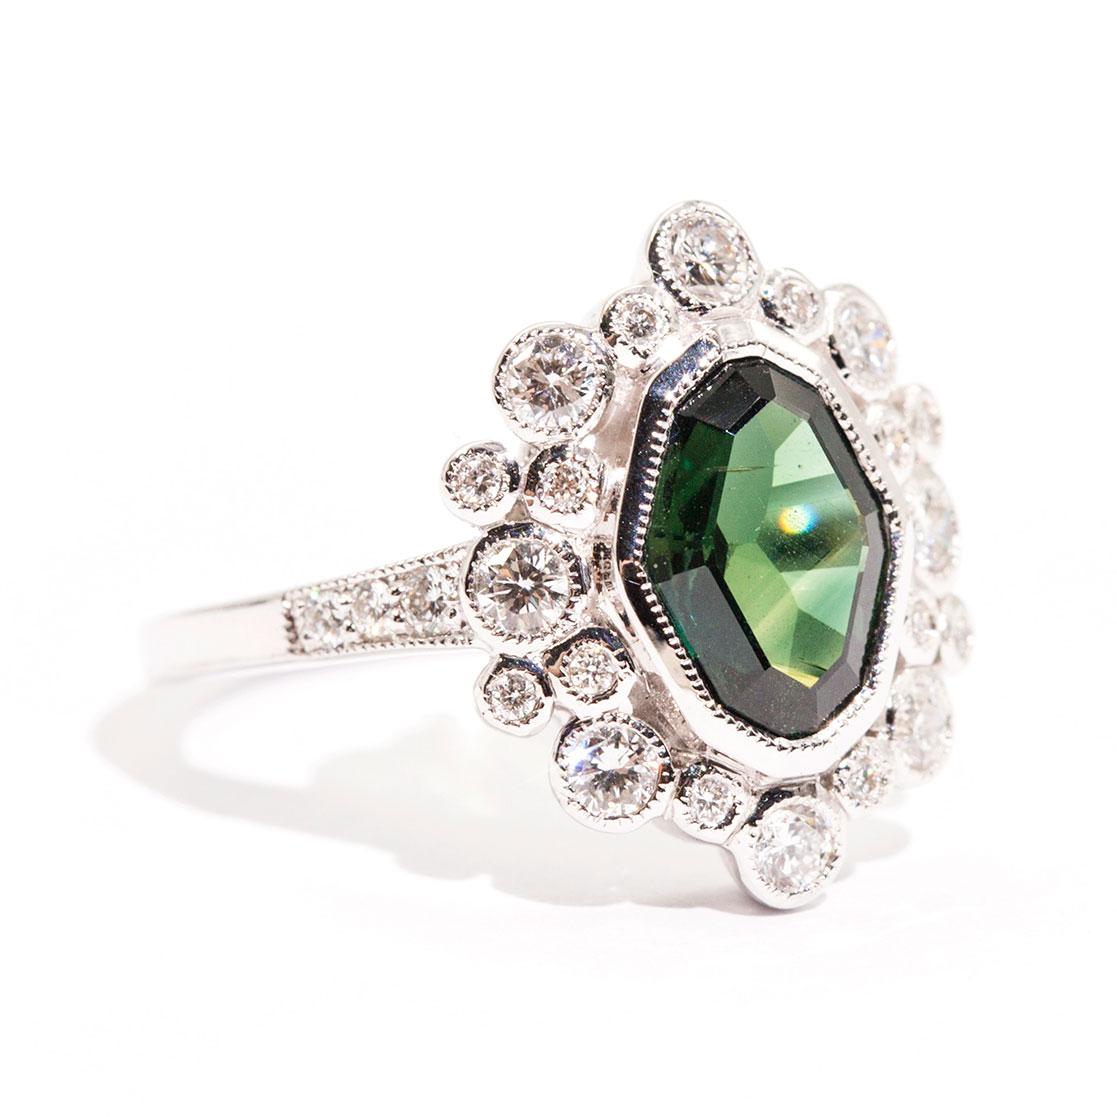 Forged in 18 carat white gold is this alluring art deco and vintage inspired ring that features a 1.98 carat mix cut natural sapphire of a bright deep green colour and is encompassed with total of 0.64 carats of bright white round brilliant cut